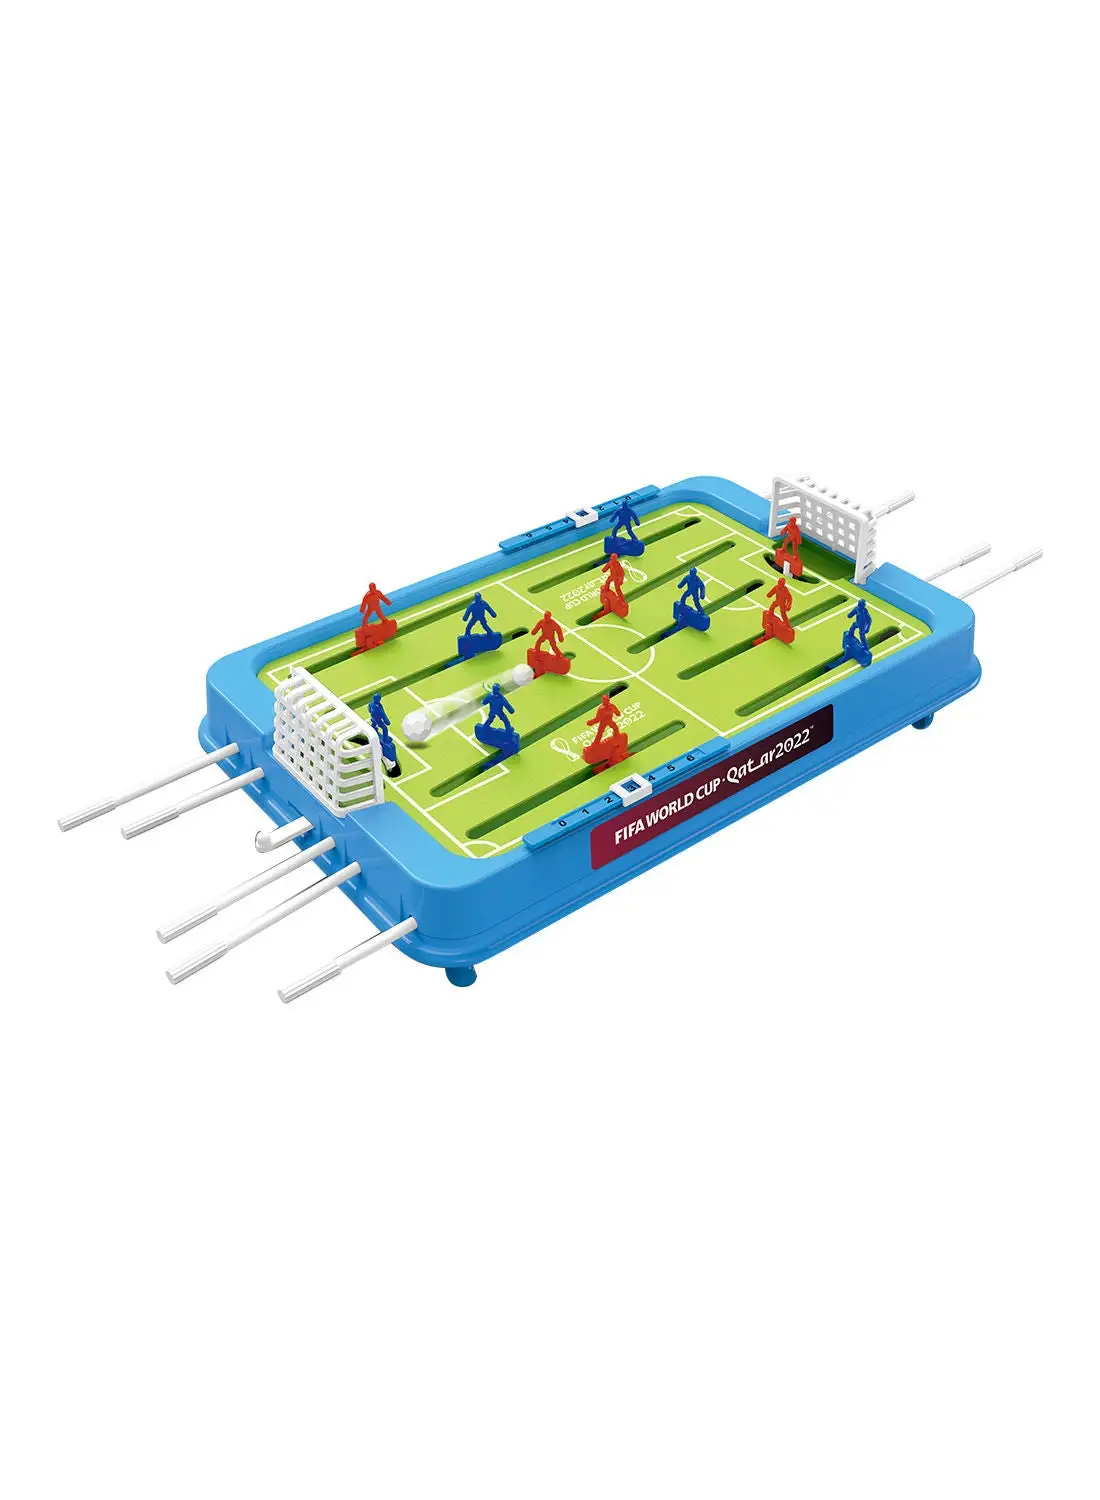 FIFA Mini Football Tabletop Soccer For Indoor Room Desktop Sport Board Game For Adults Kids And Family PMV